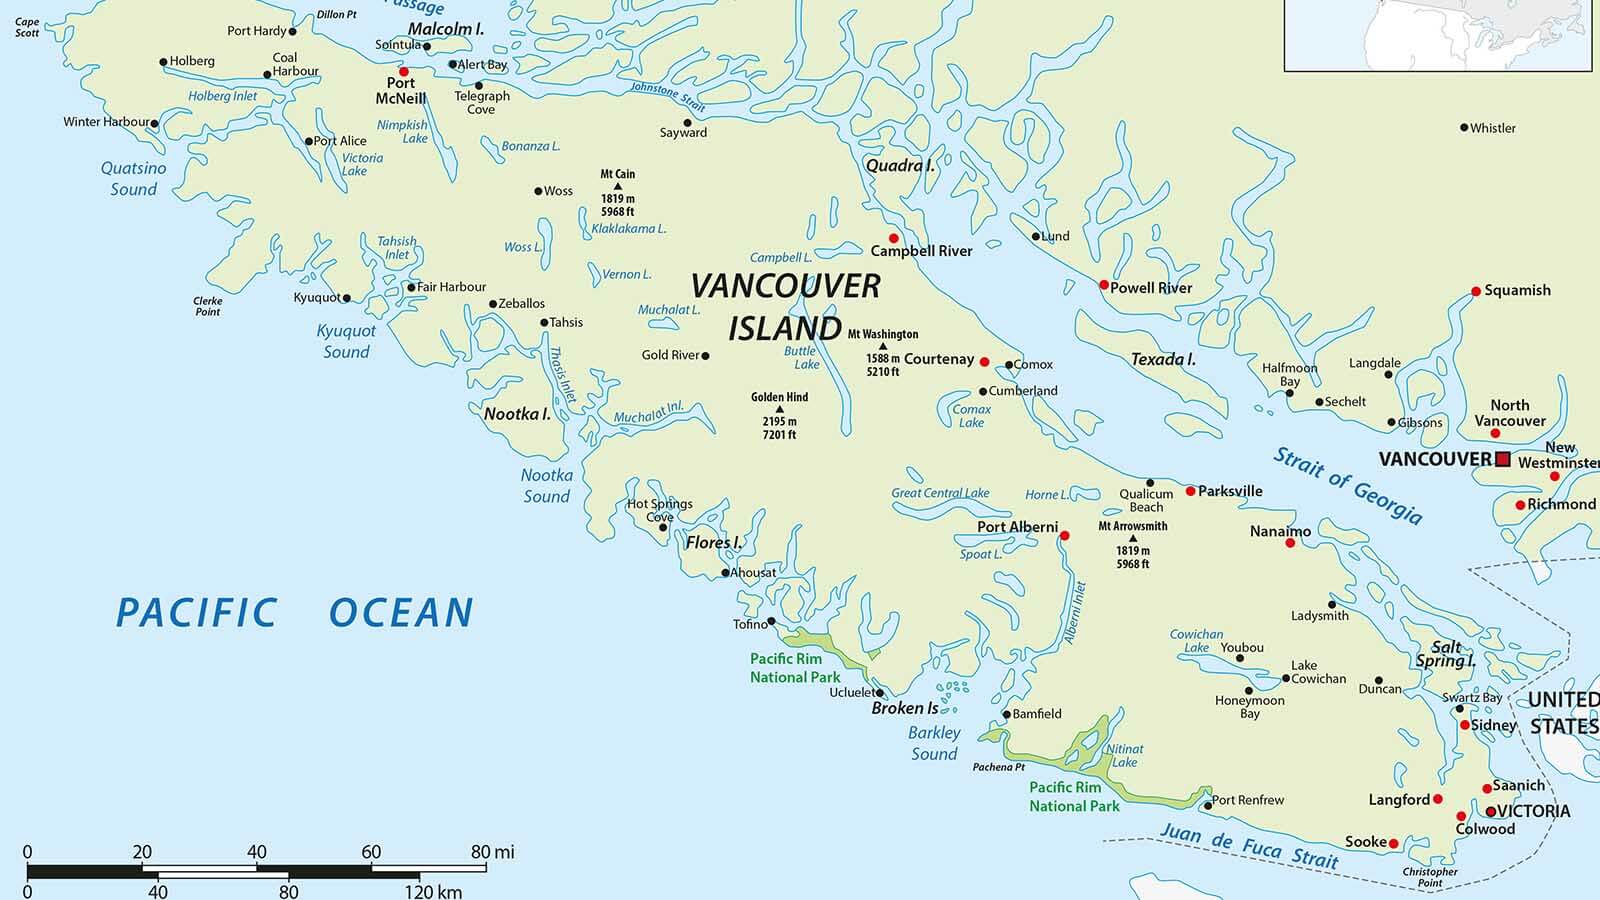 A map of Vancouver Island